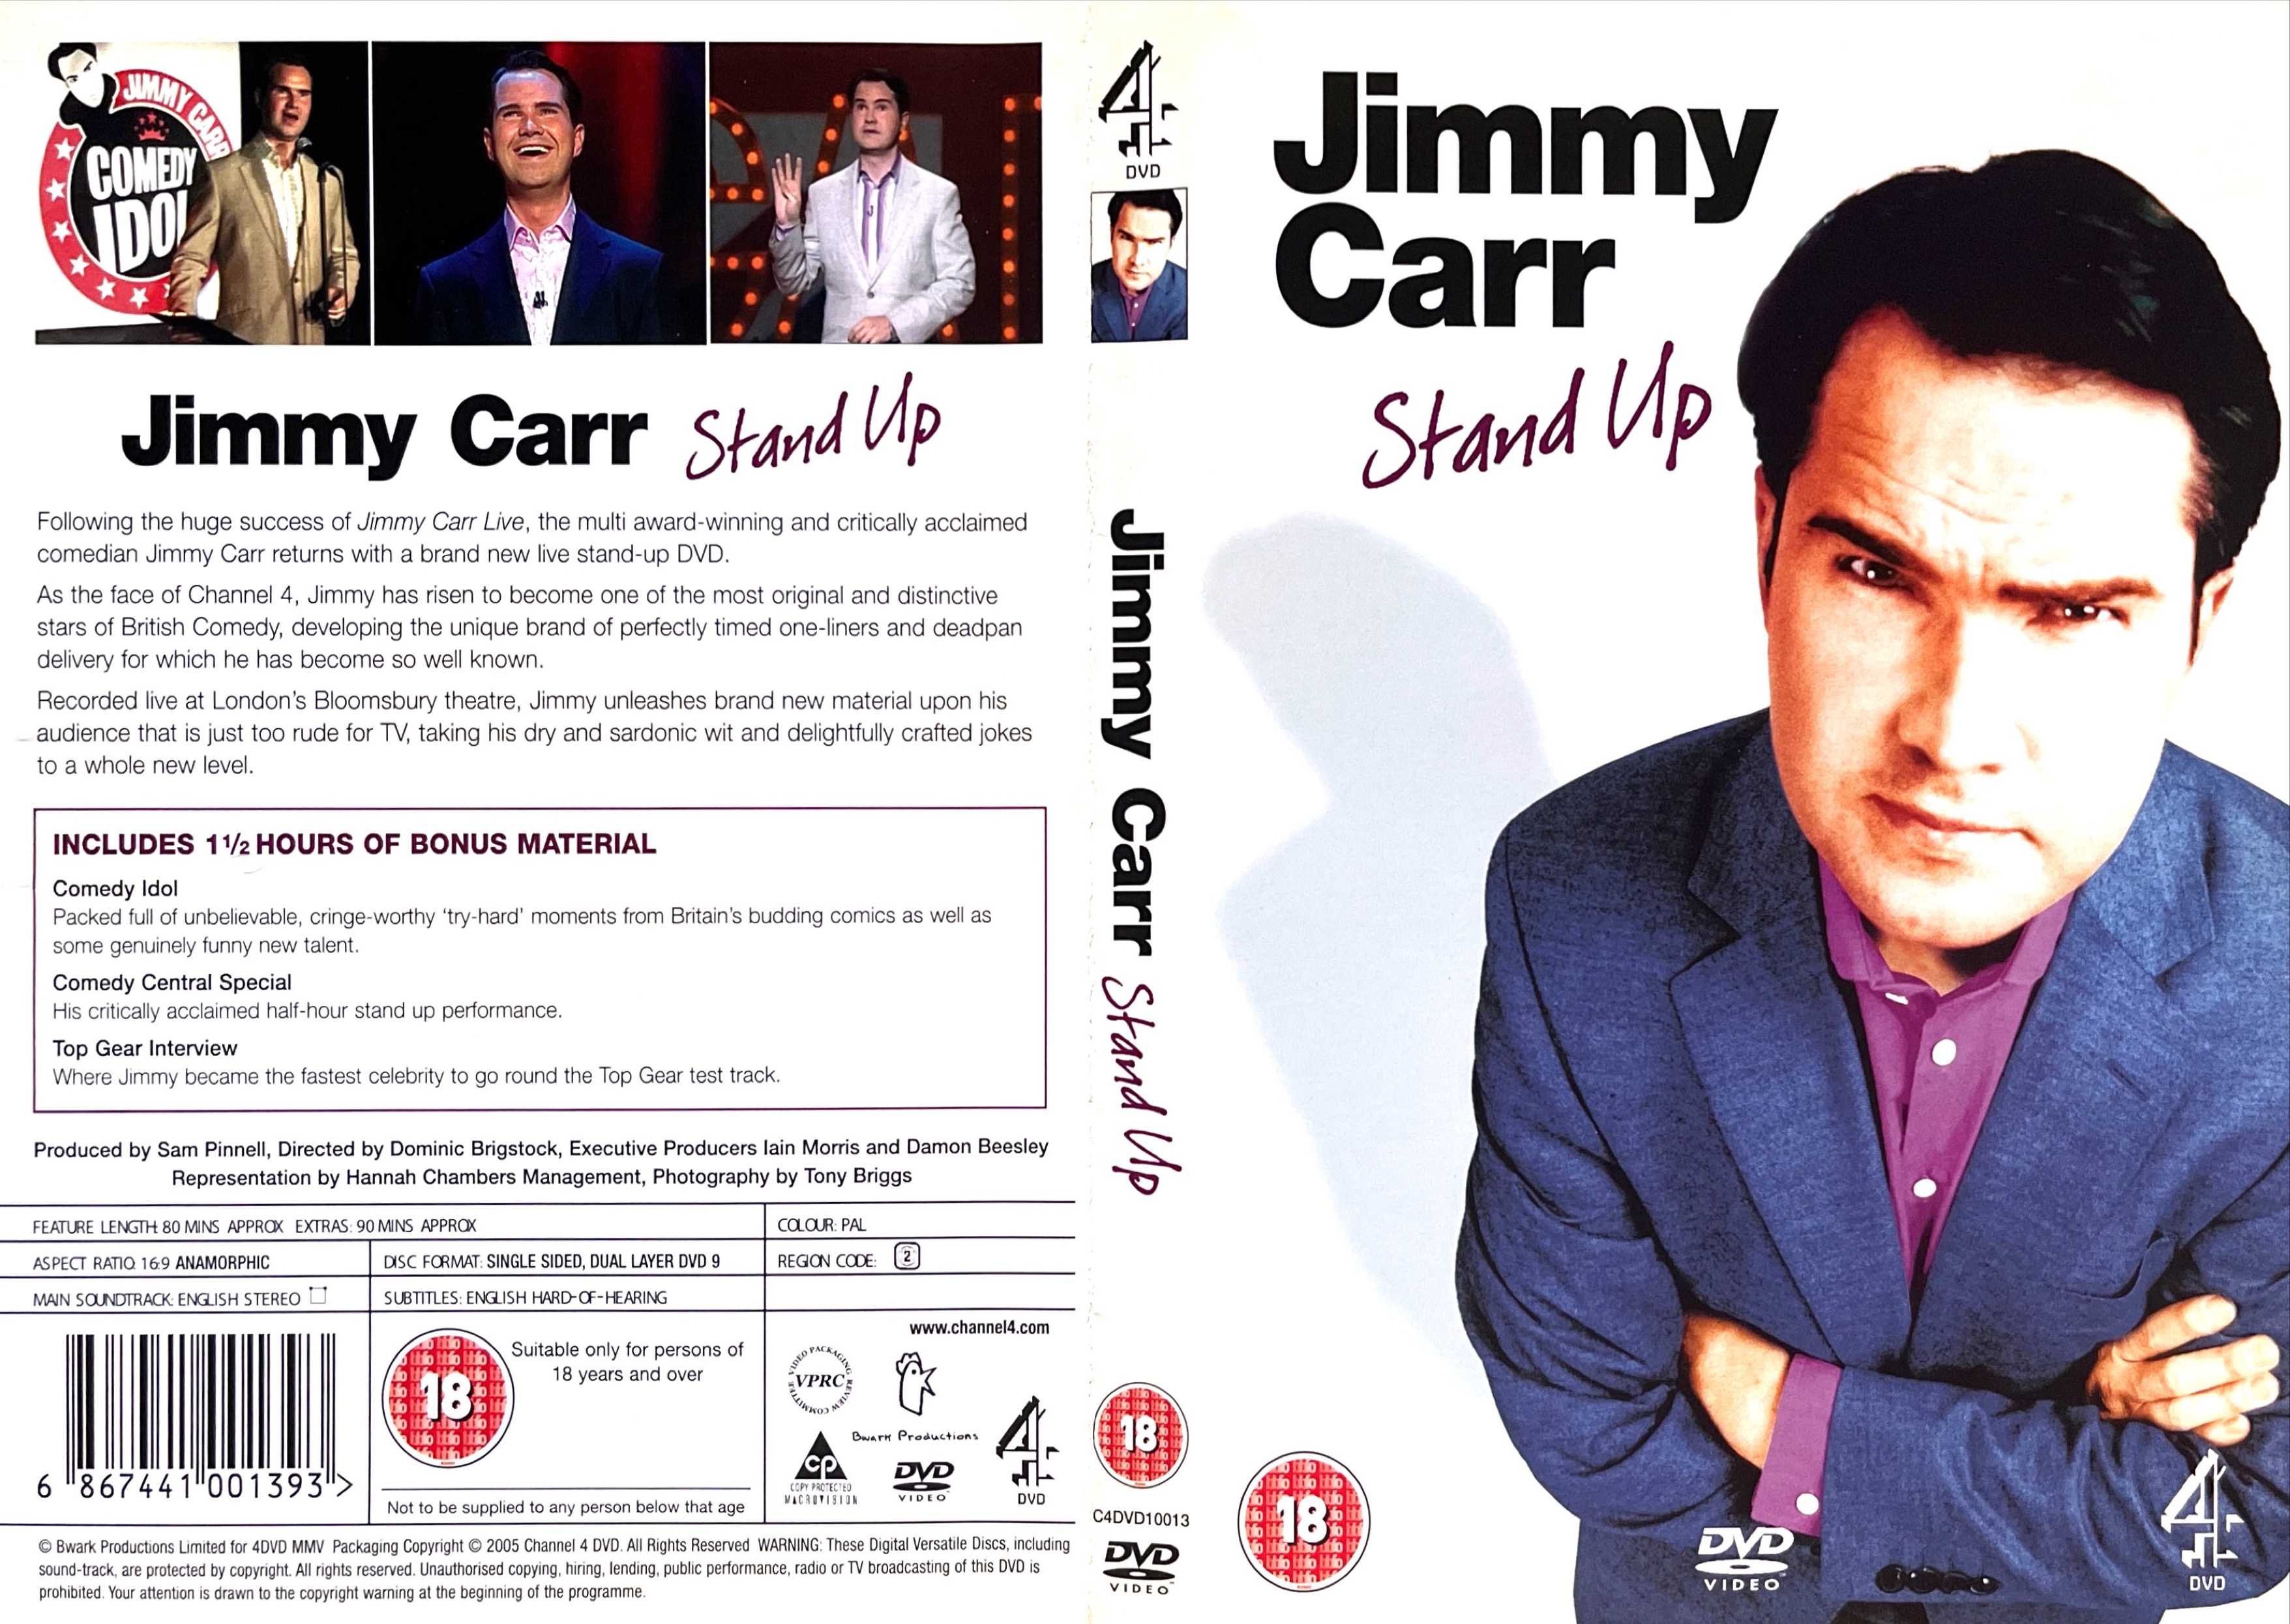 DVD cover spread for Jimmy Carr Live, which has a white background. On the front cover, Jimmy stands with his arms crossed, while on the back there are images from the show above a description of the DVD.